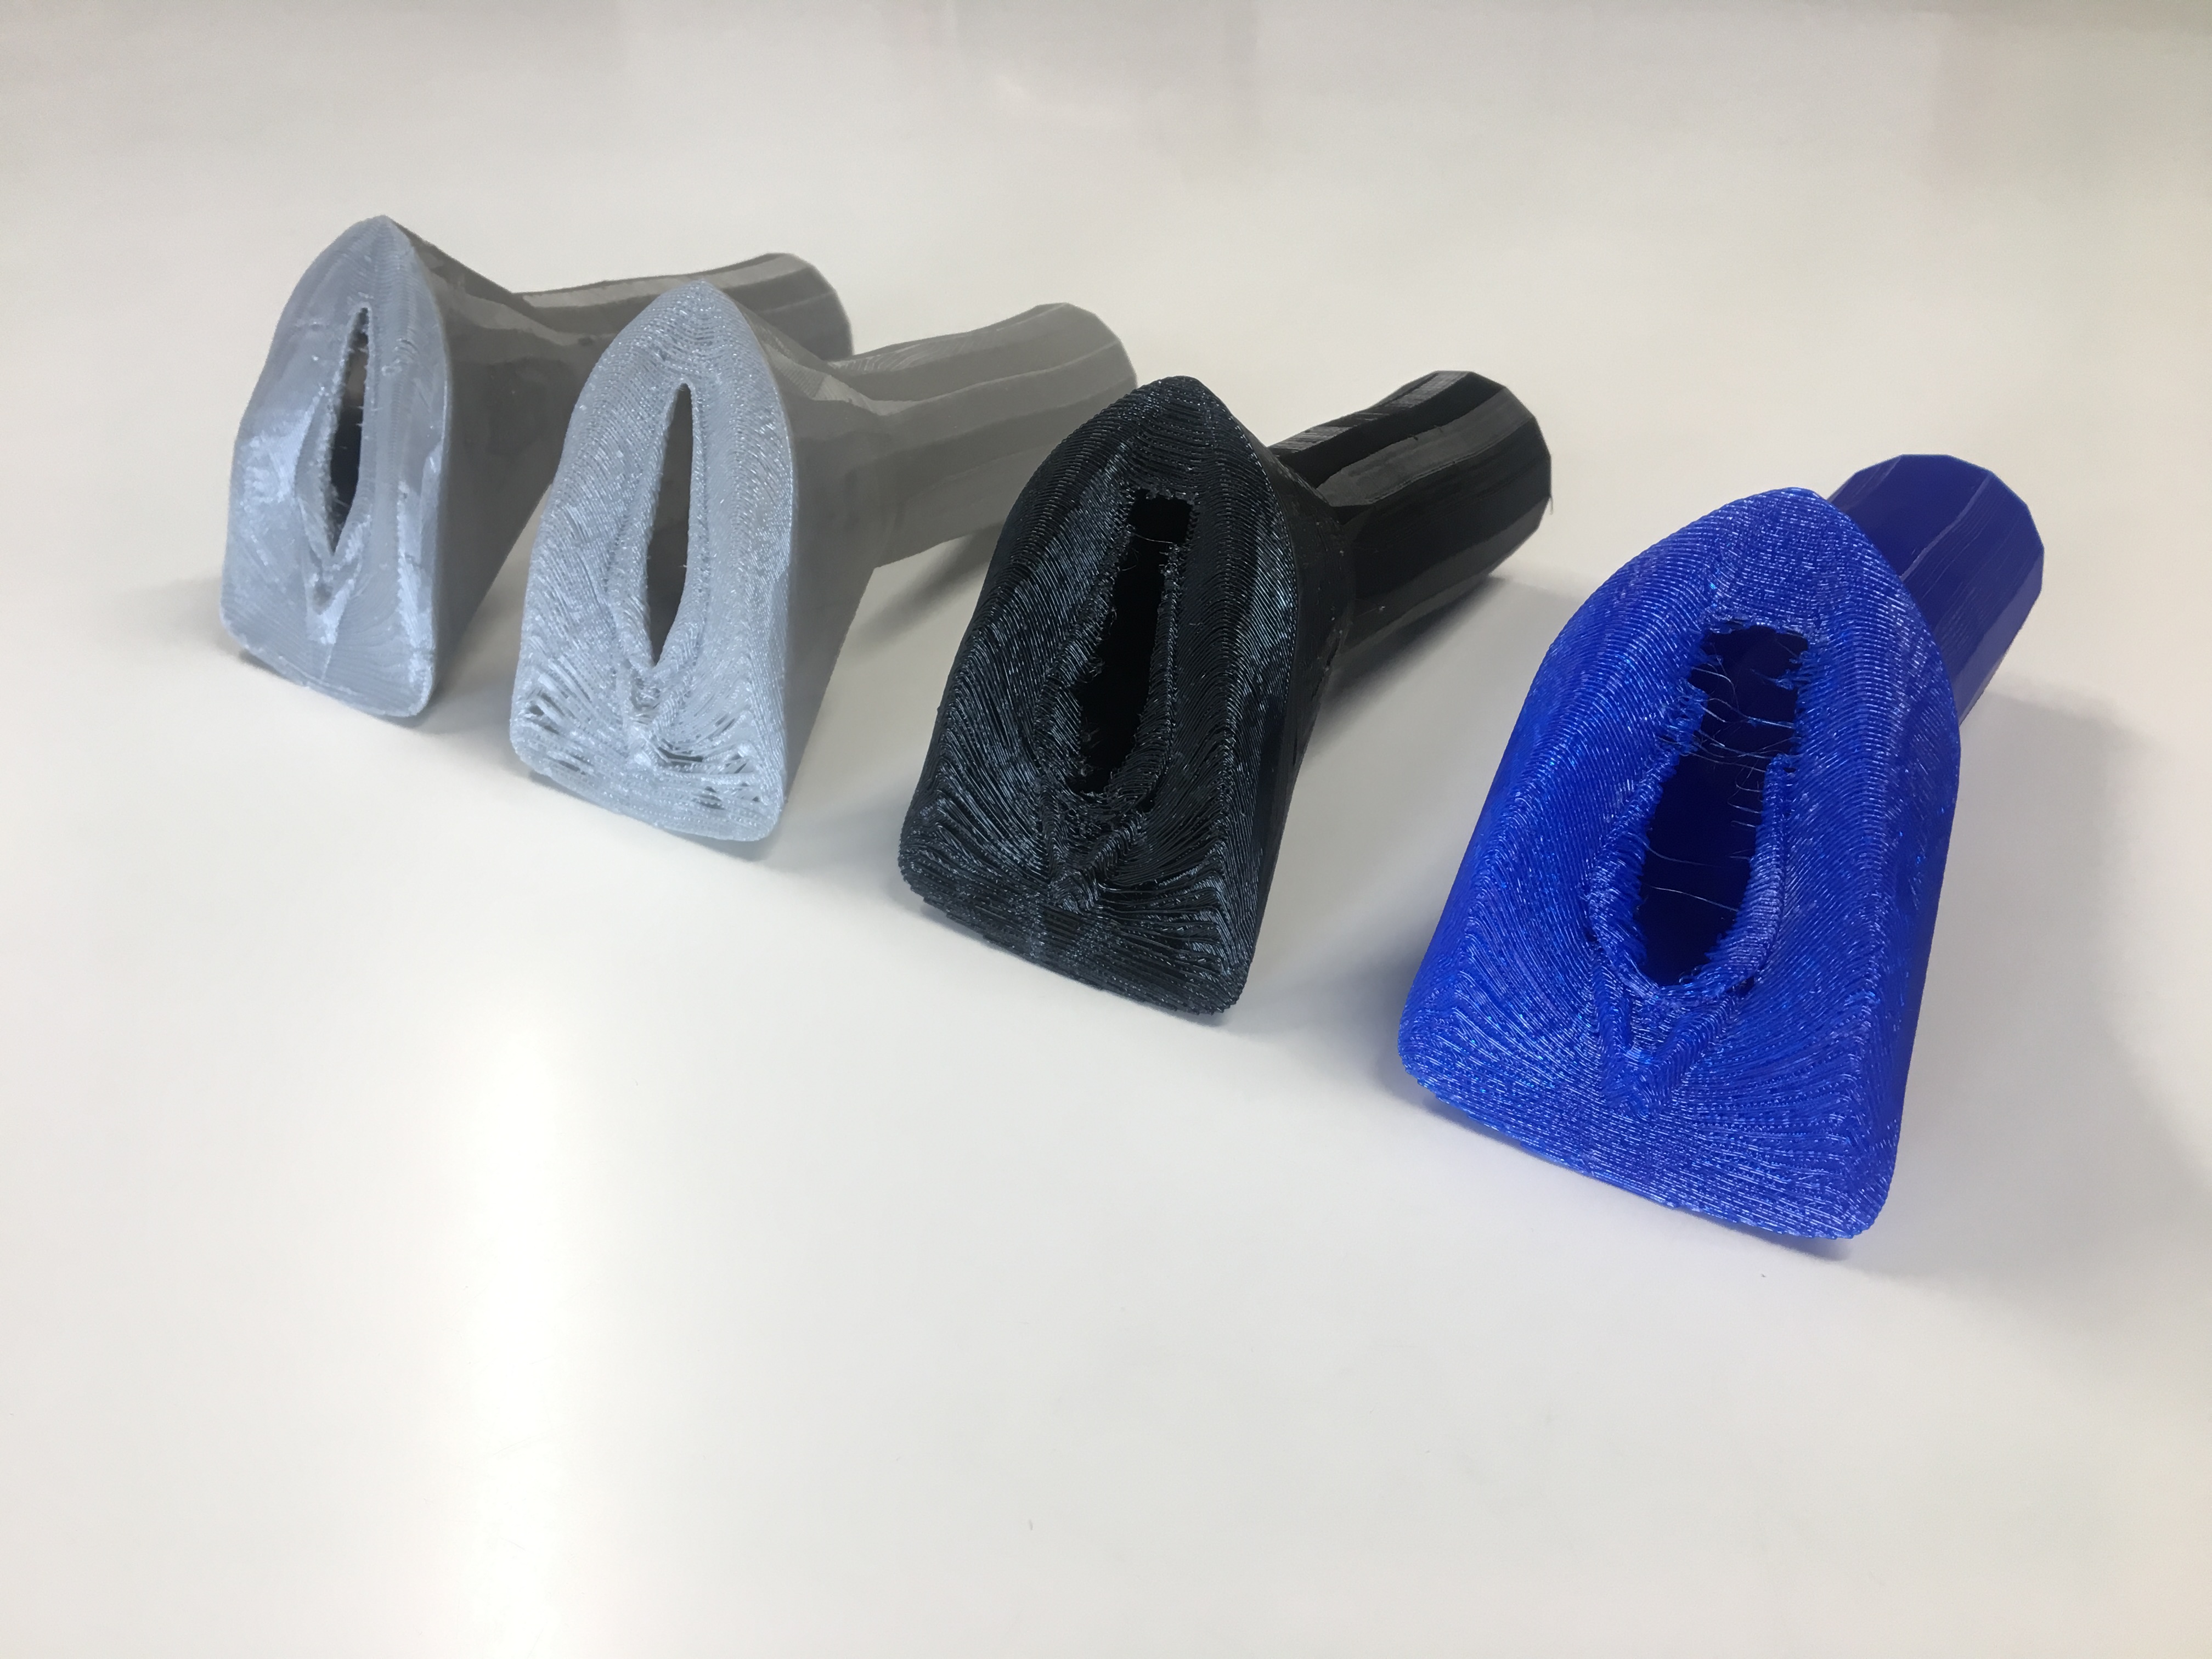 Could 3D printed vaginas be a tool for more grassroots sexual education? 